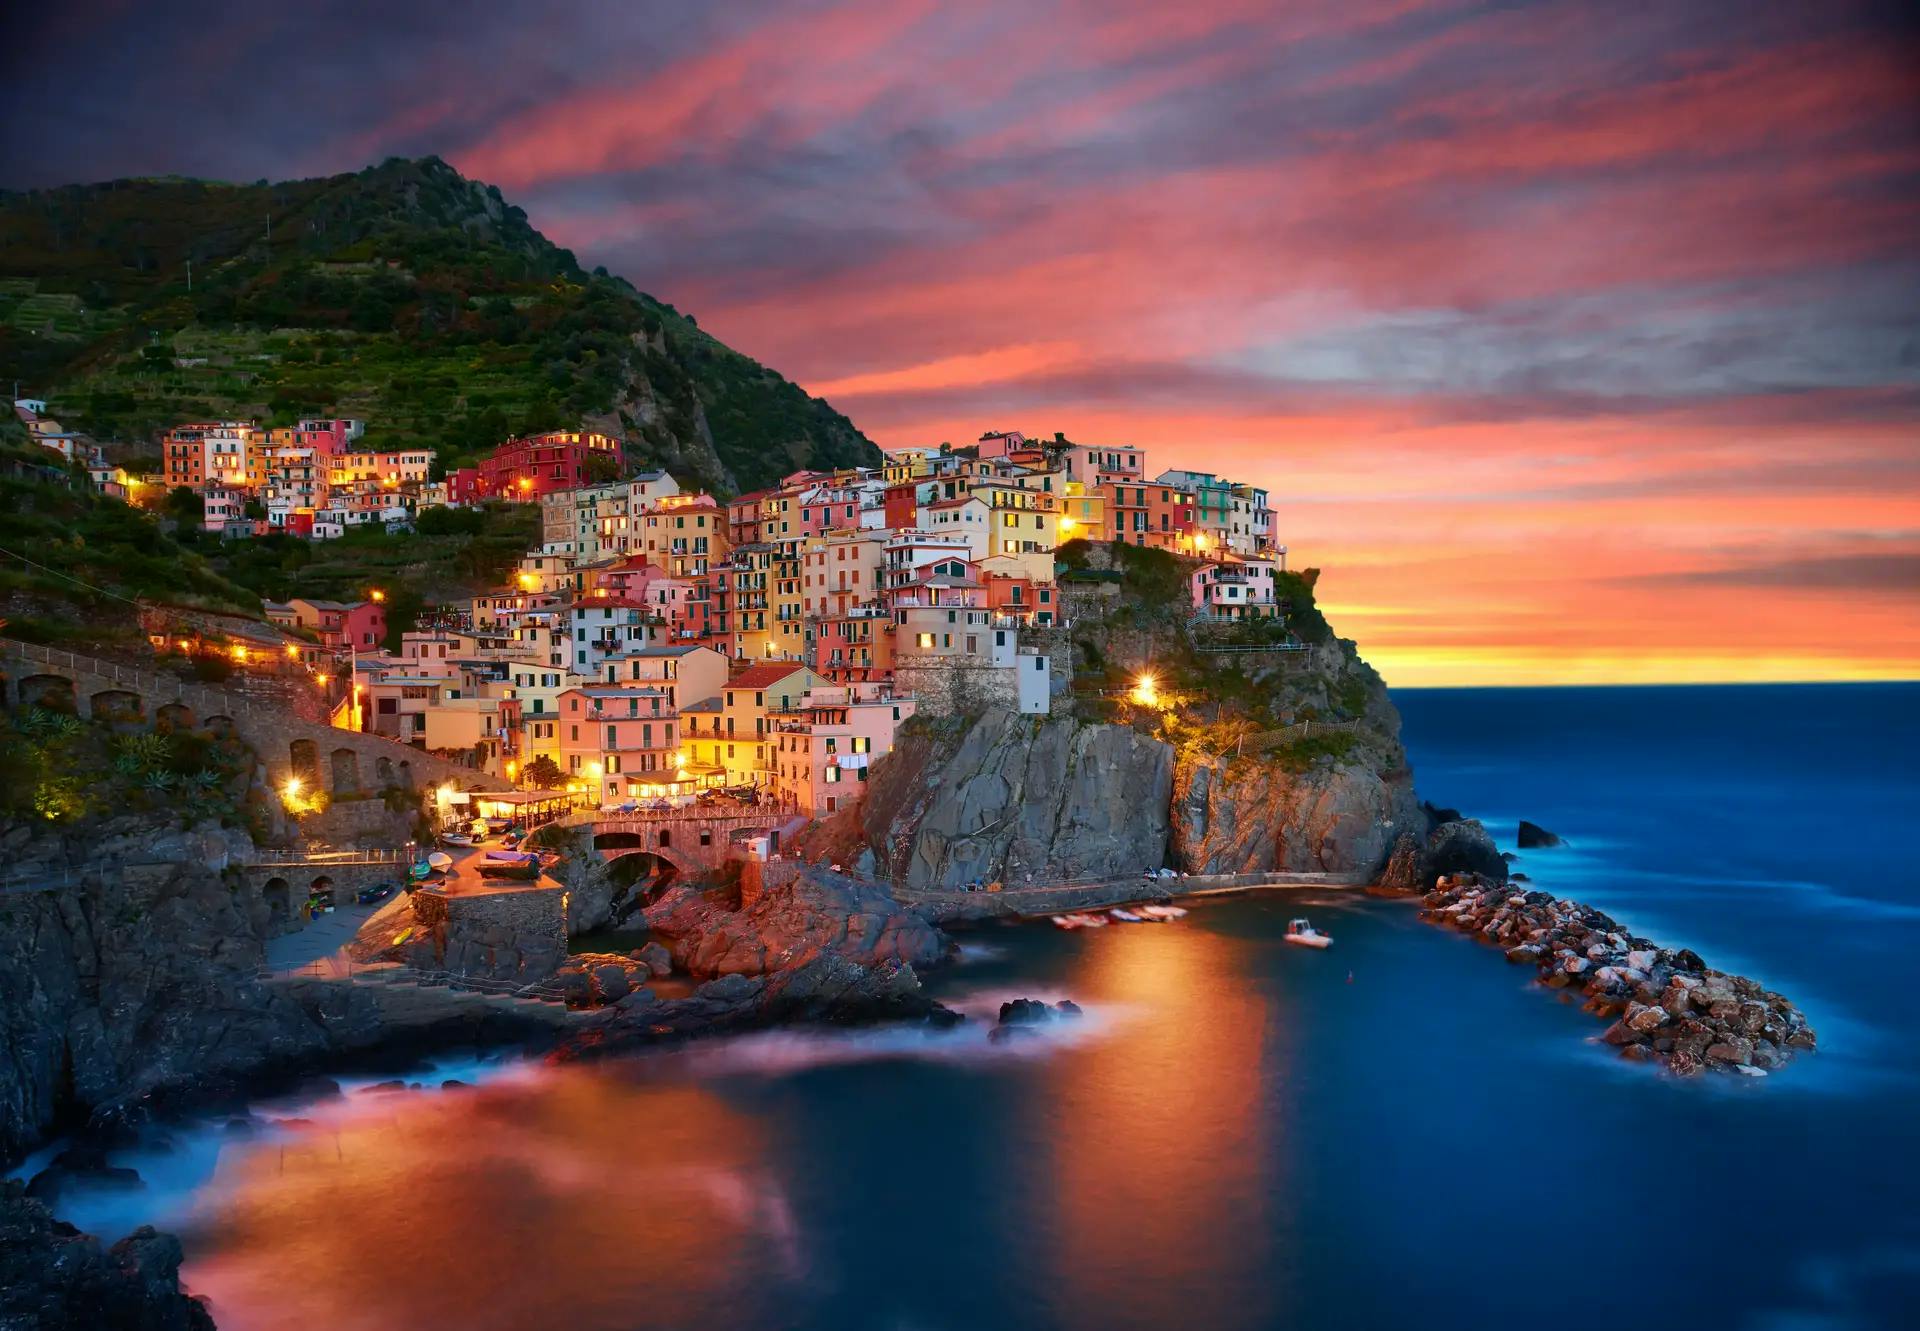 A cliffside village at dusk surrounded by water